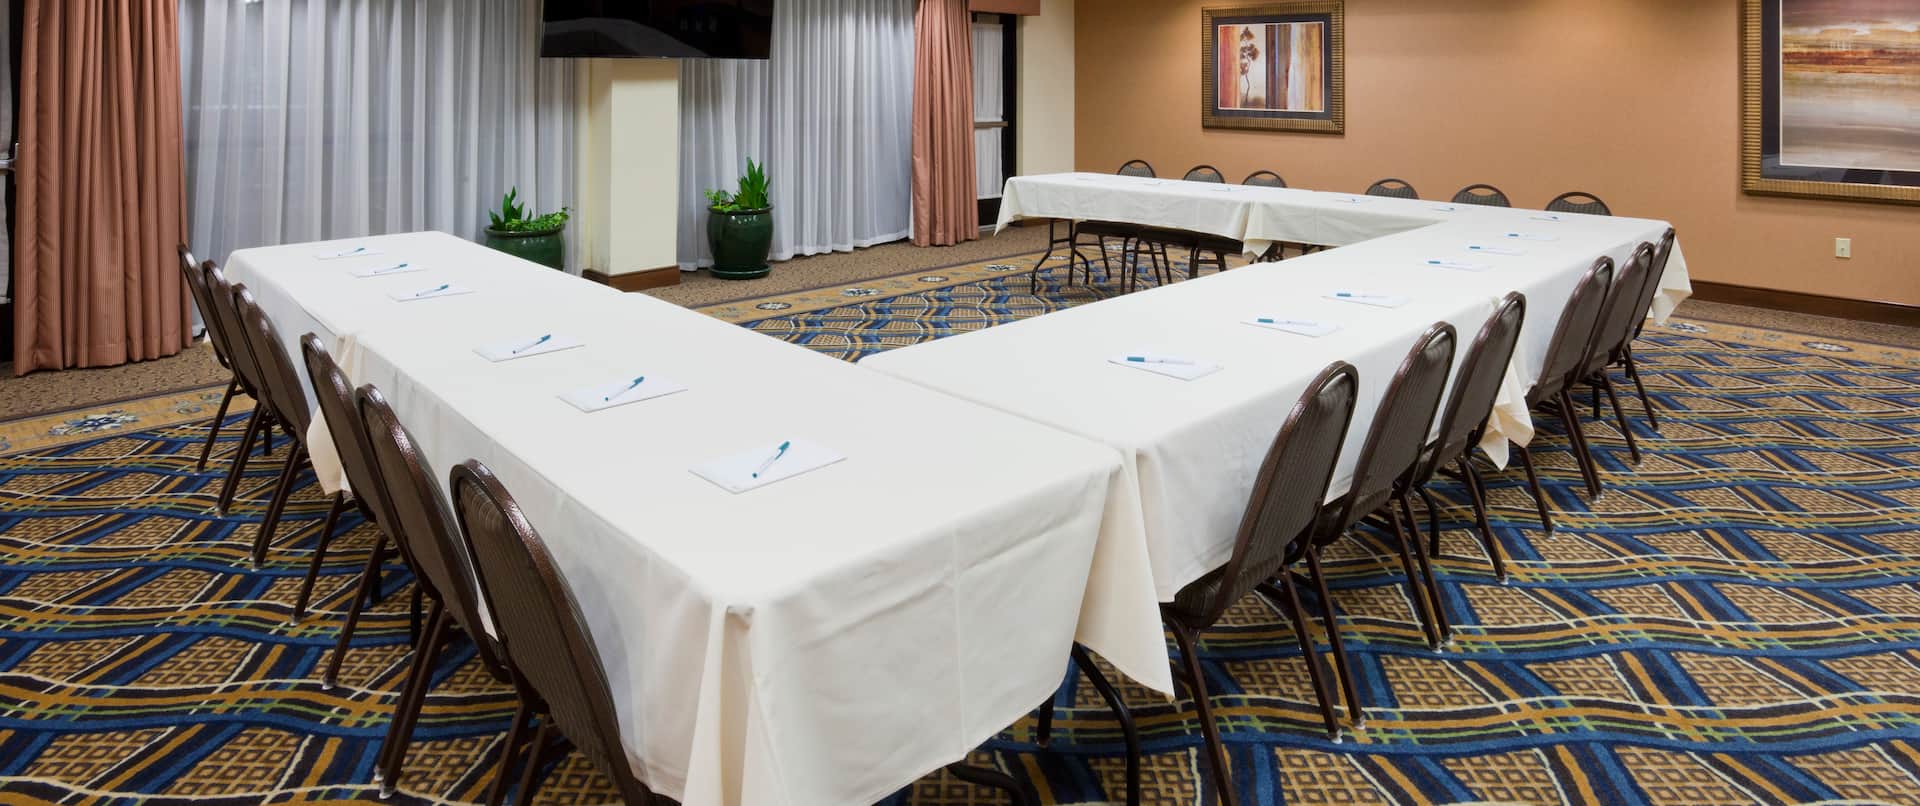 Homewood Suites by Hilton Minneapolis- St. Louis Park at West End Hotel, MN - Meeting Room